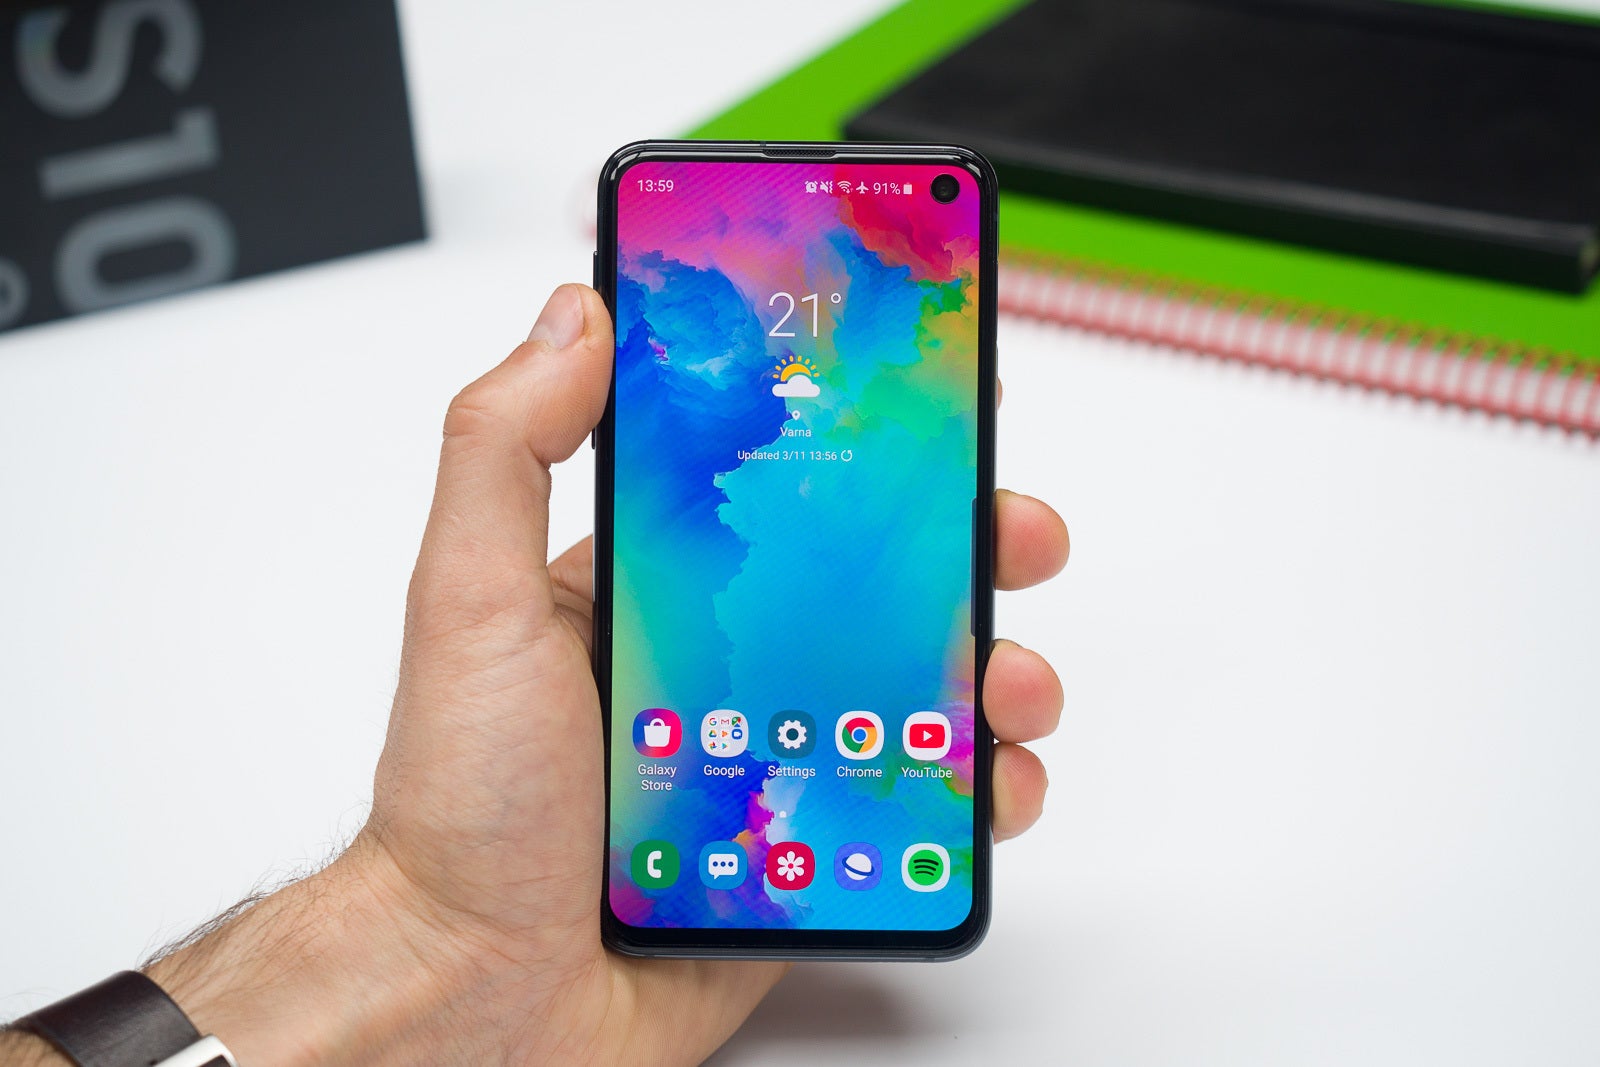 Don't expect a Galaxy S10e-like flat display on the Galaxy S11e - New Galaxy S11 leak details larger displays, five models, 5G support, more